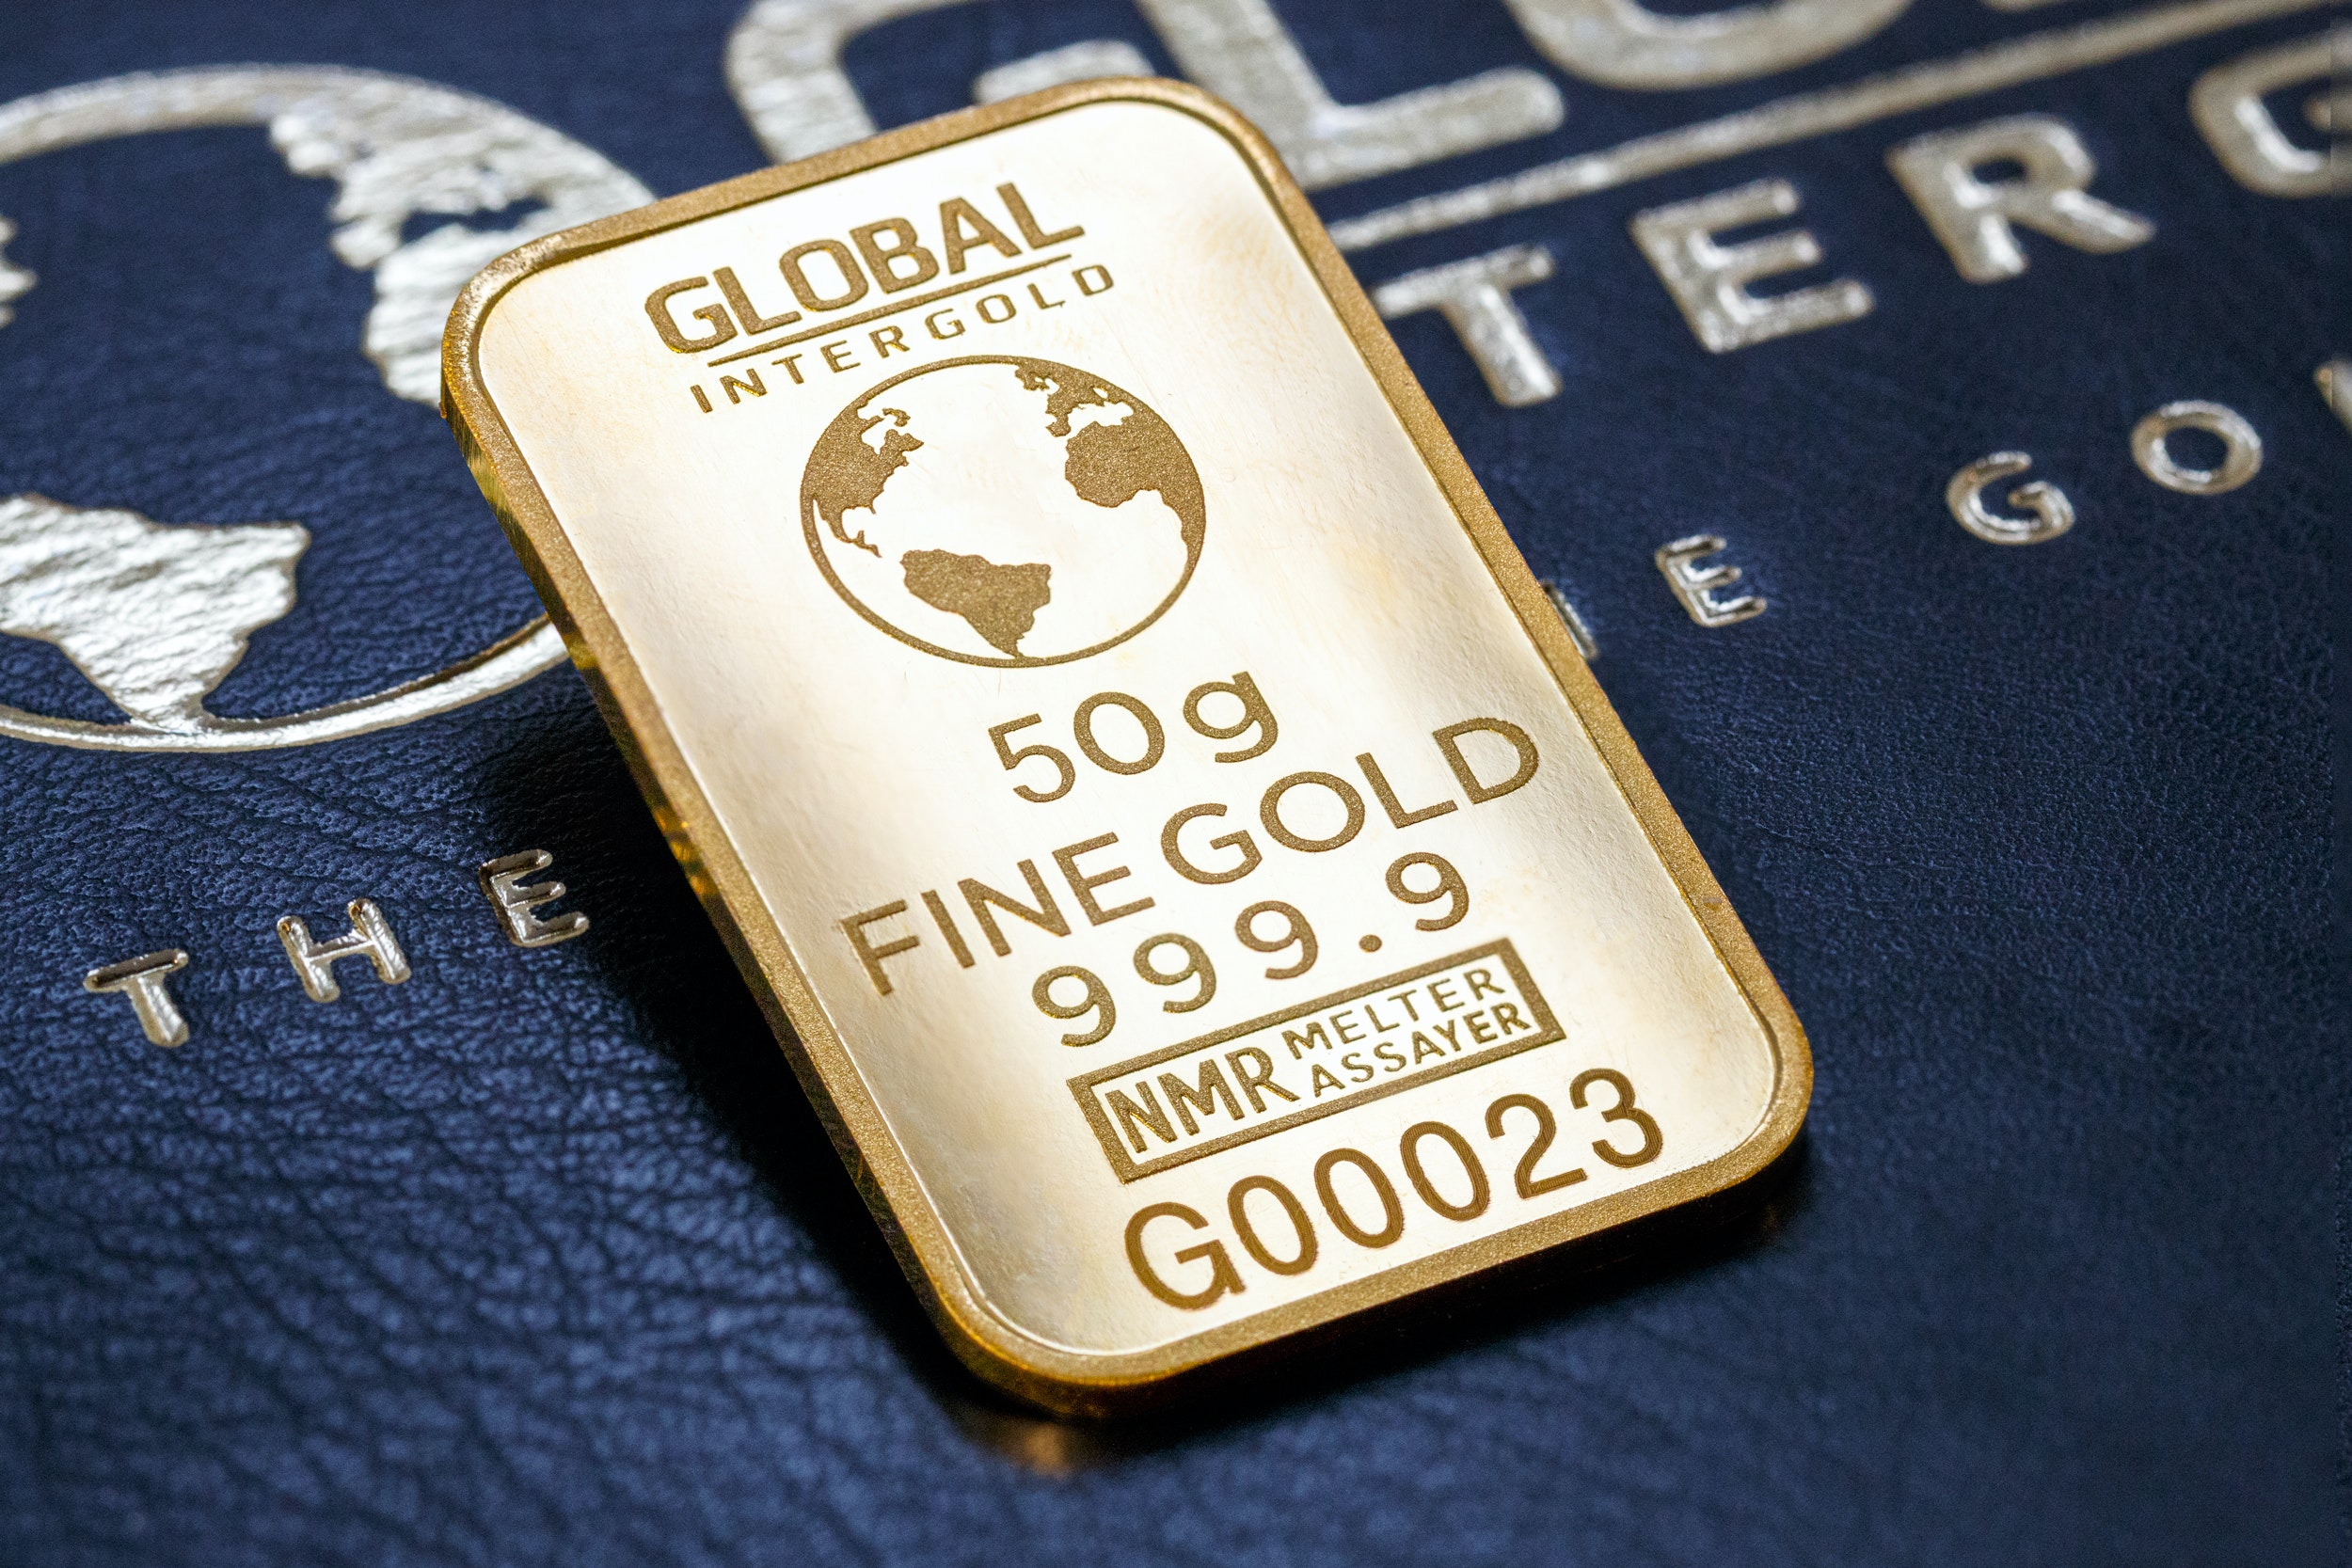 How To Find The Time To gold in an ira On Google in 2021